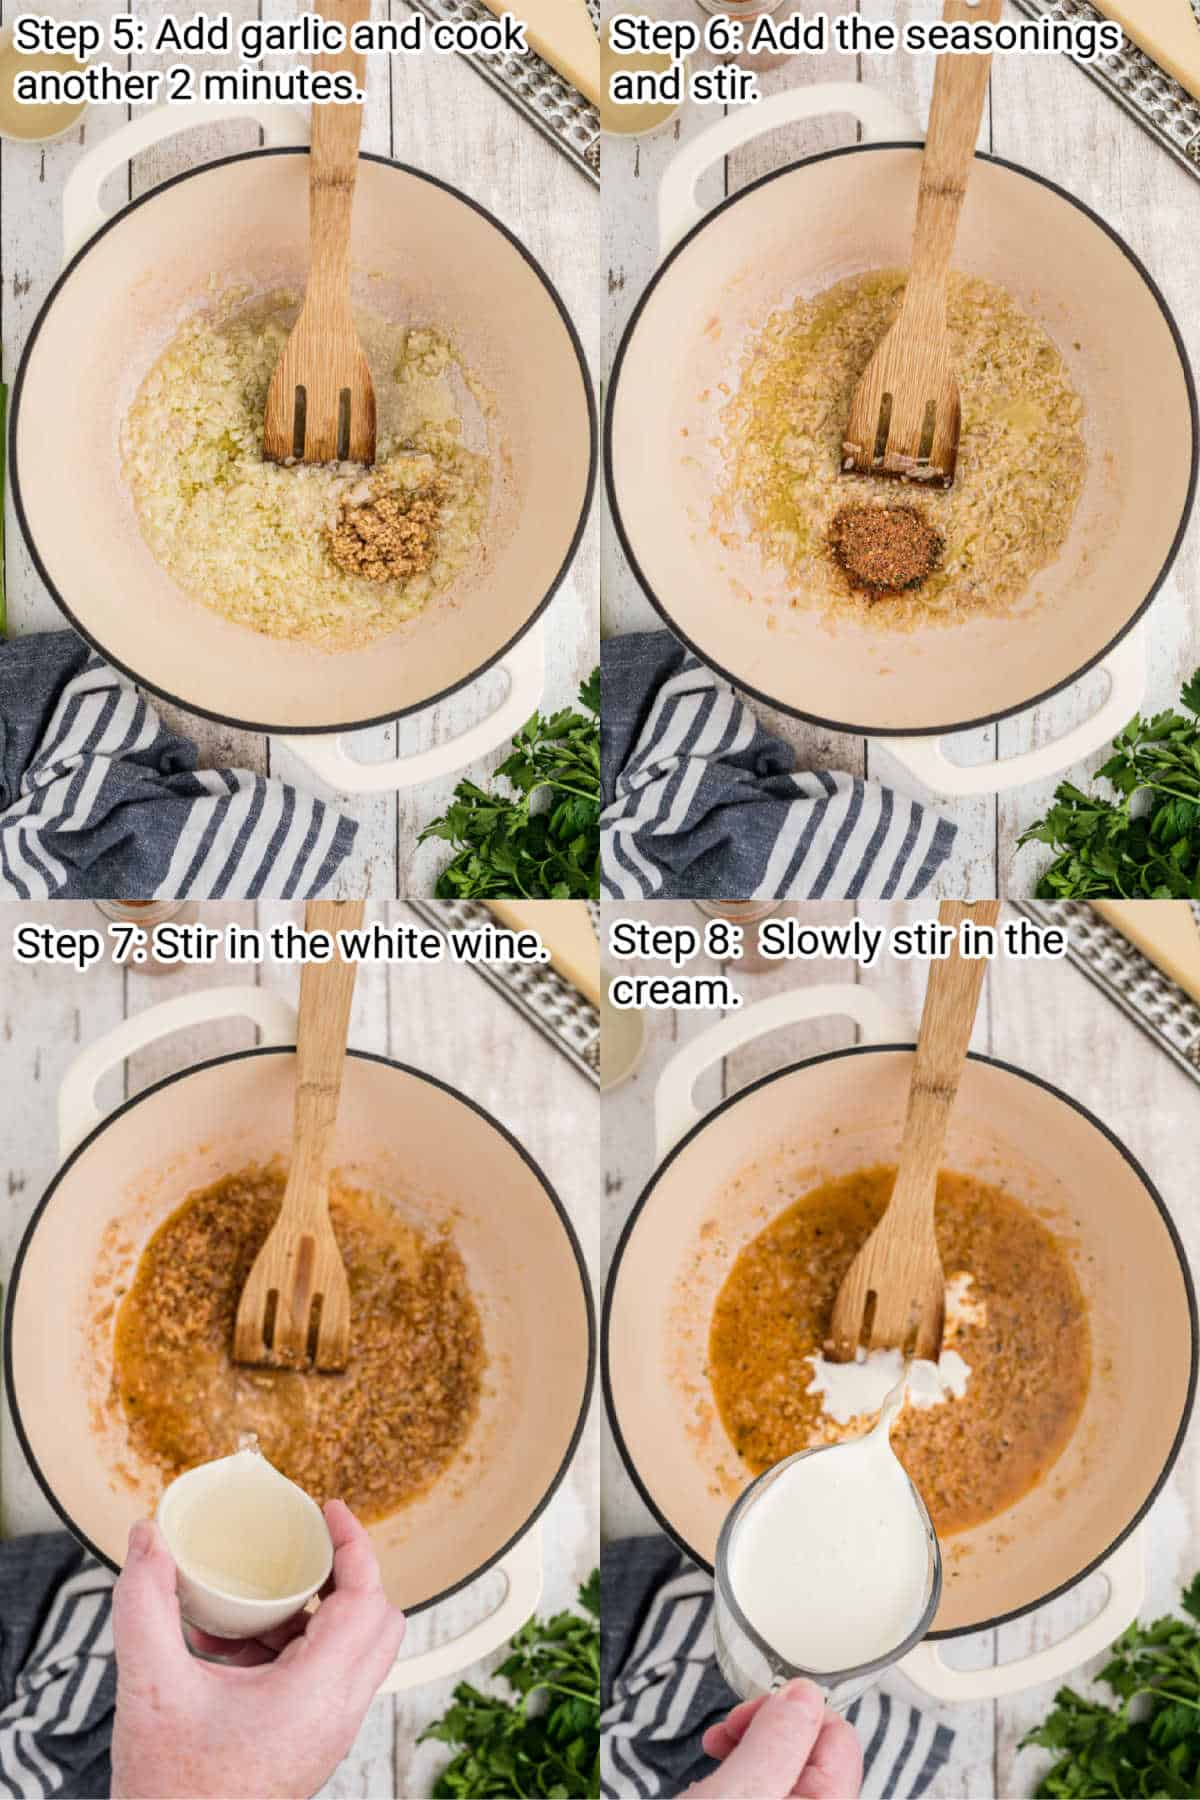 four images showing the steps needed to make a crawfish monica